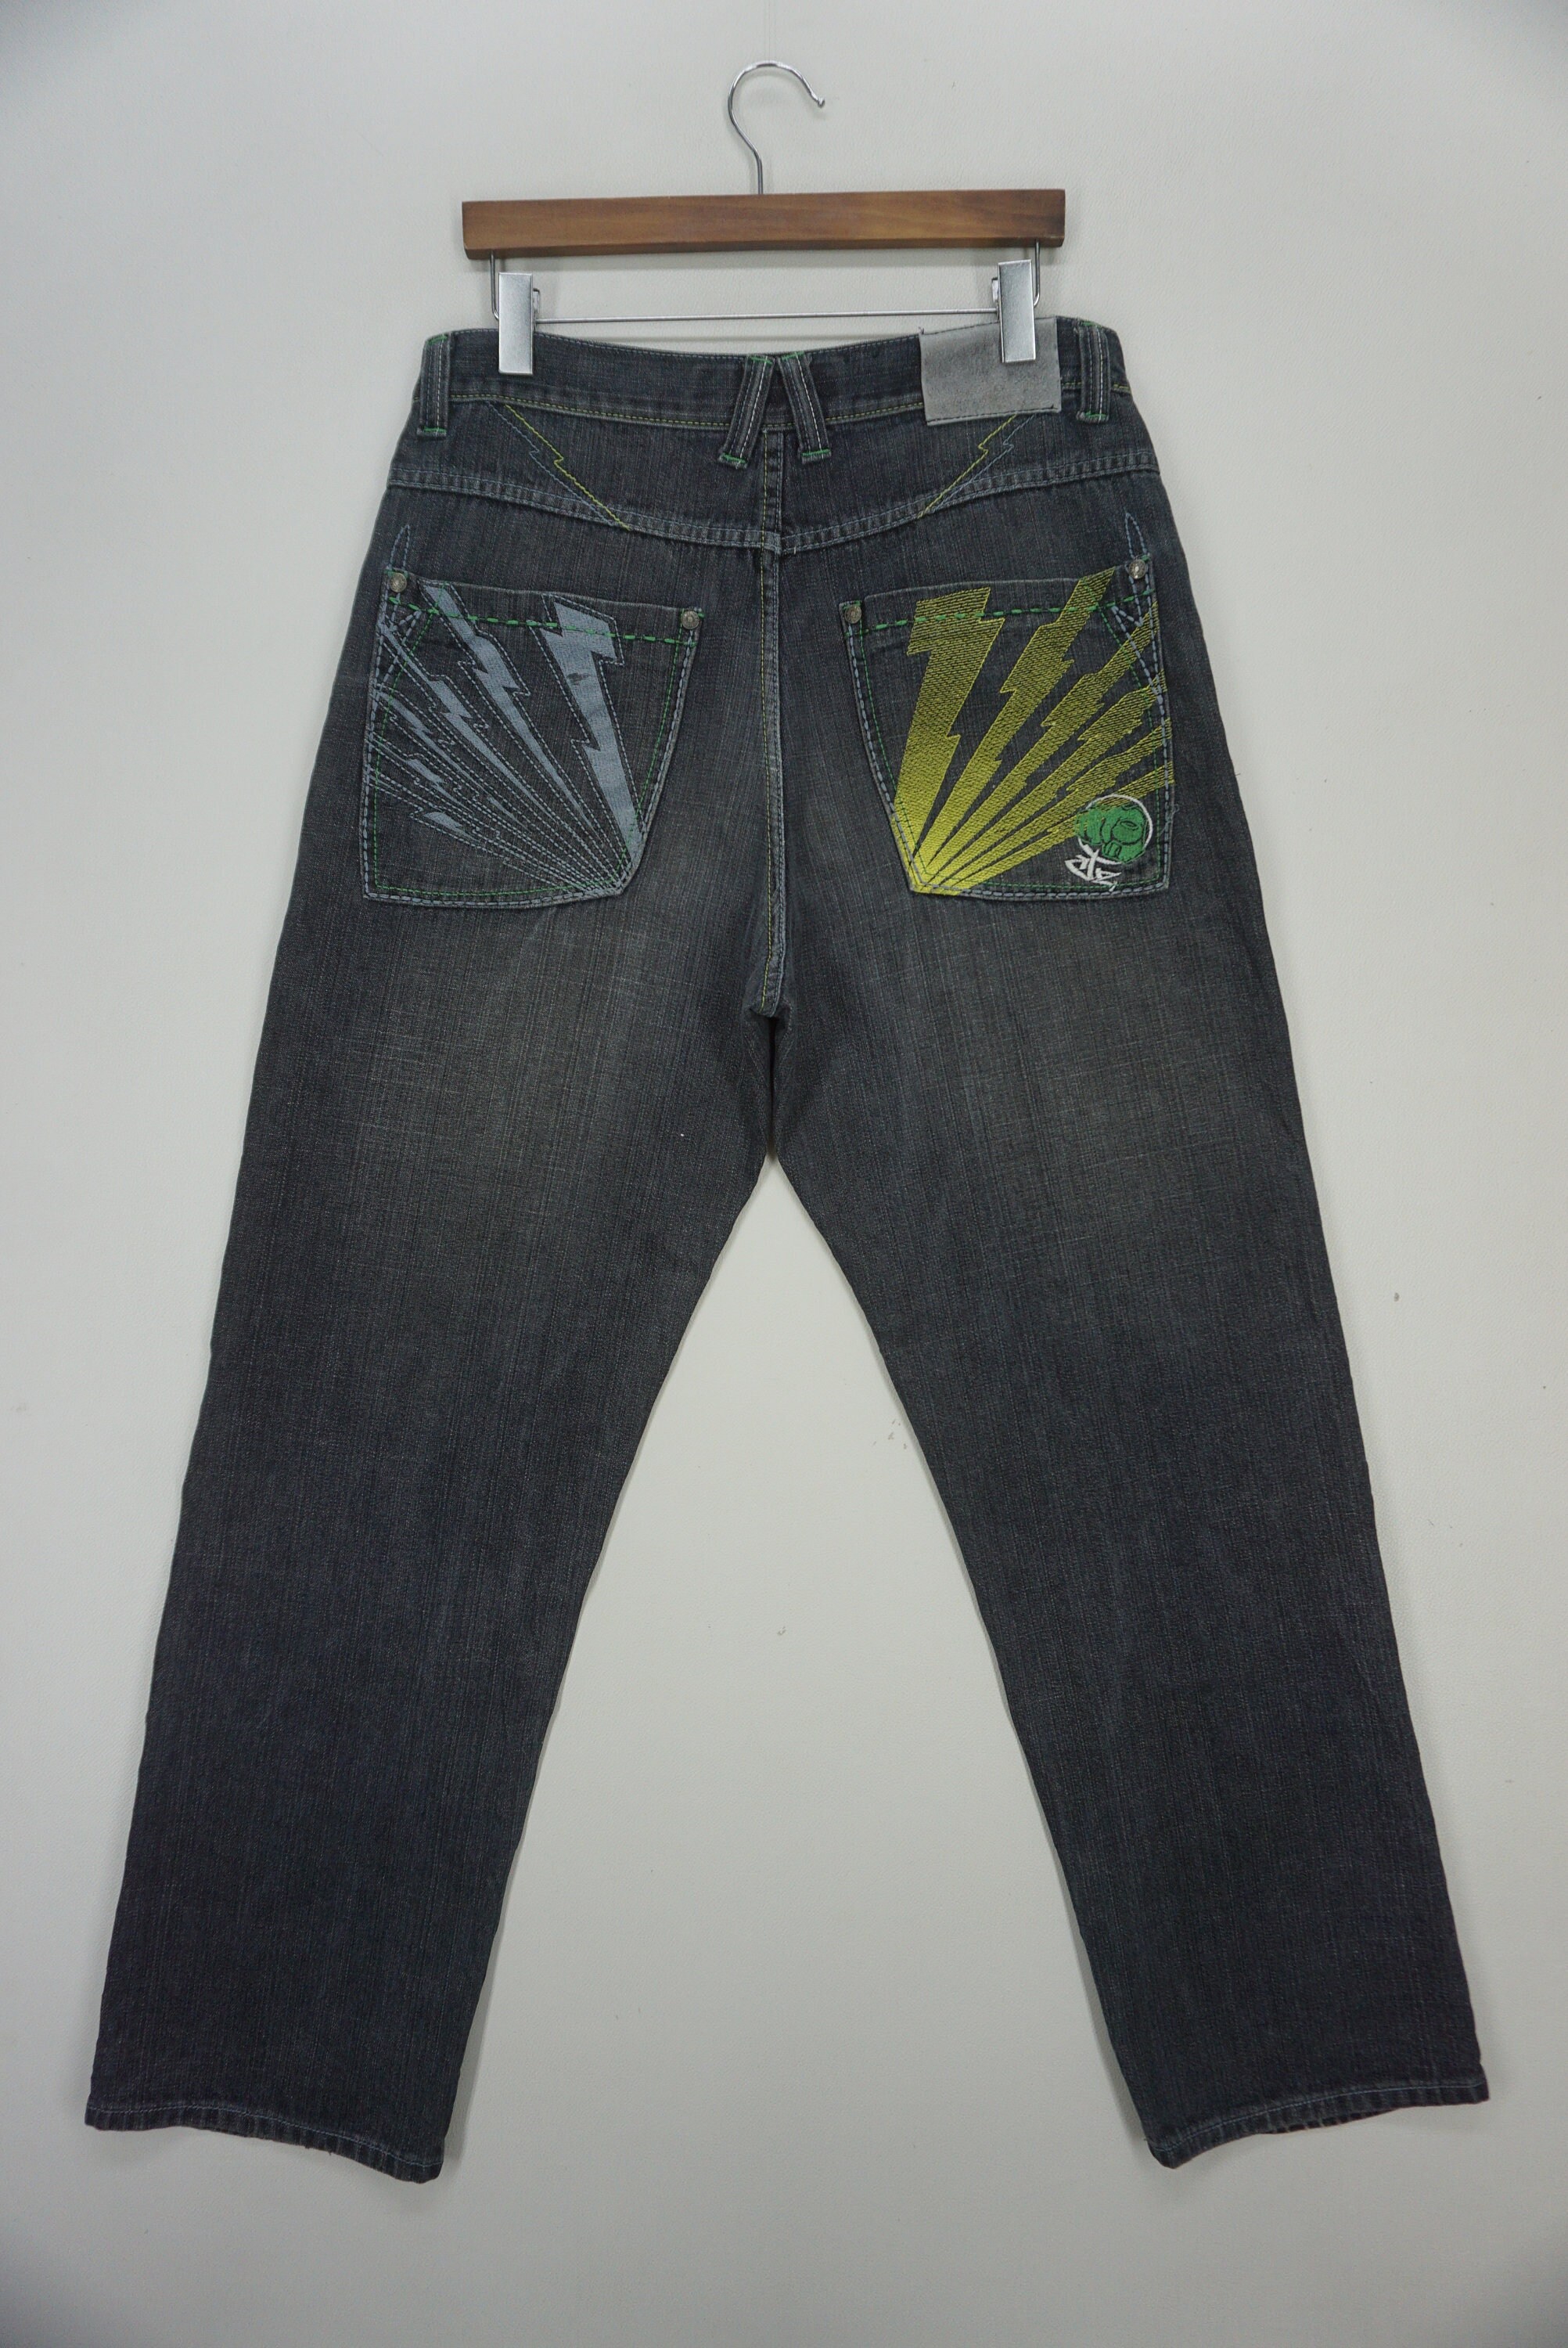 Jean/shorts Waistband Stretcher Get Those Favorite Jeans, Shorts or  Trousers to Fit Nicely 